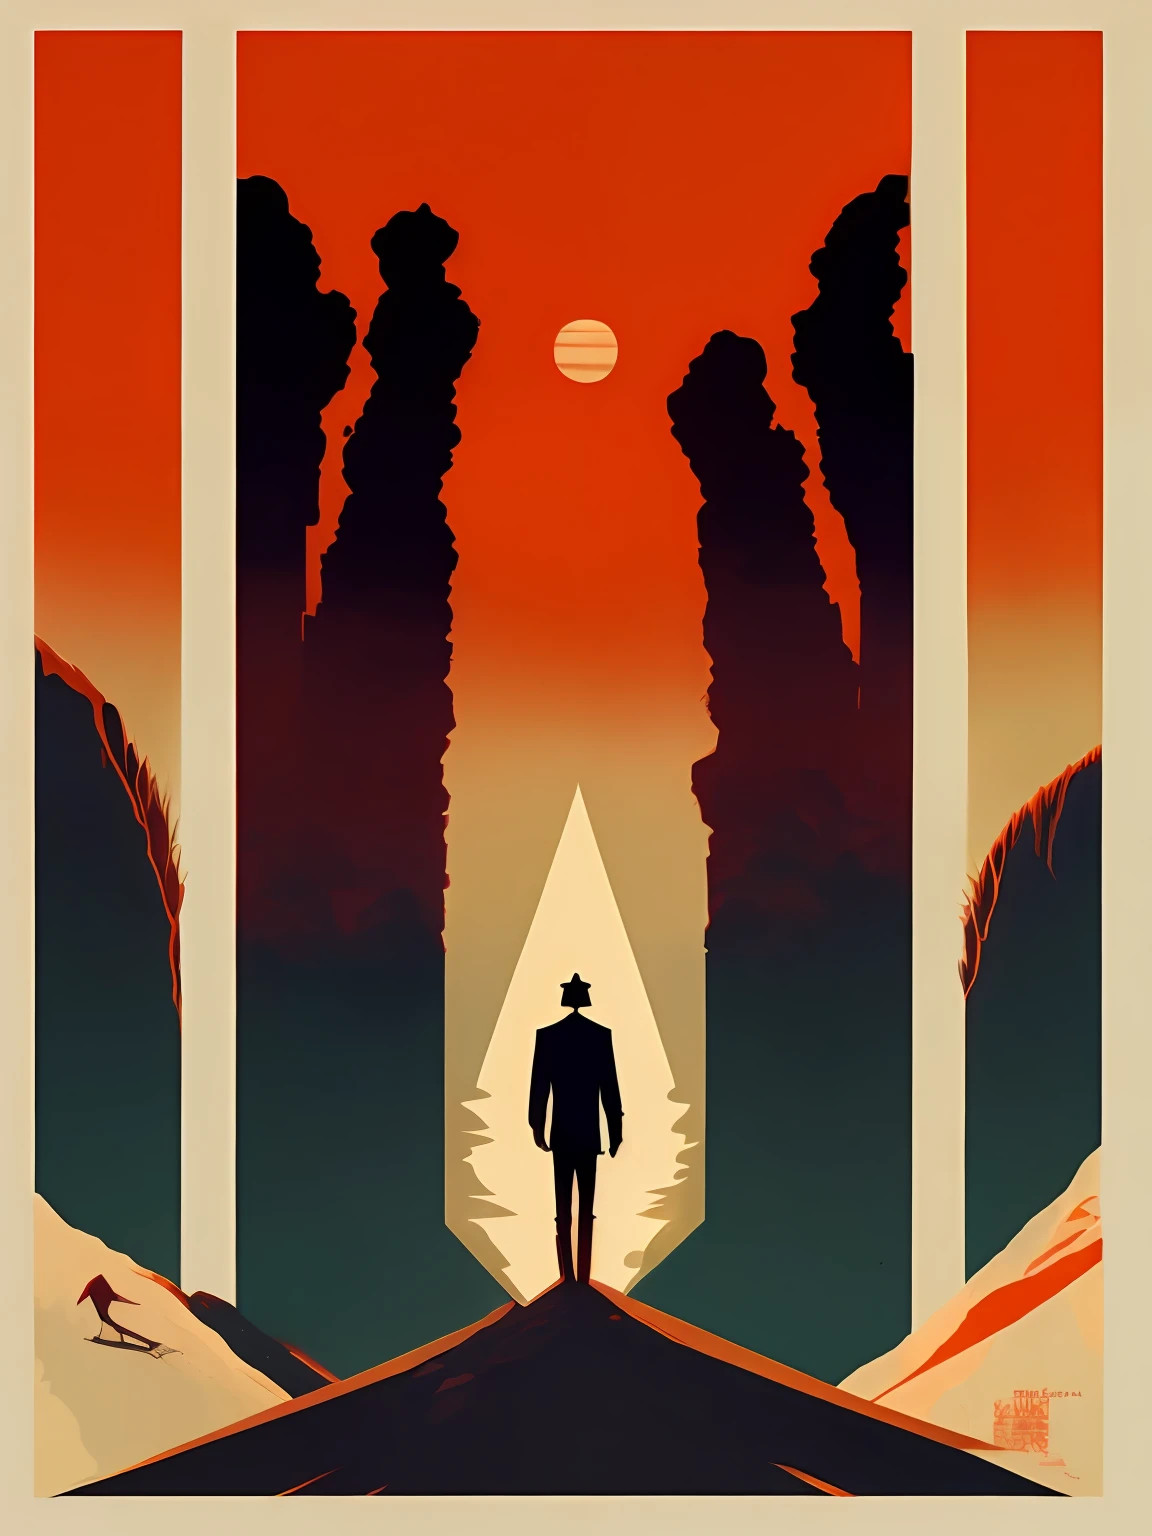 a poster of a man standing in front of a tunnel with a sunset in the background by Olly Moss